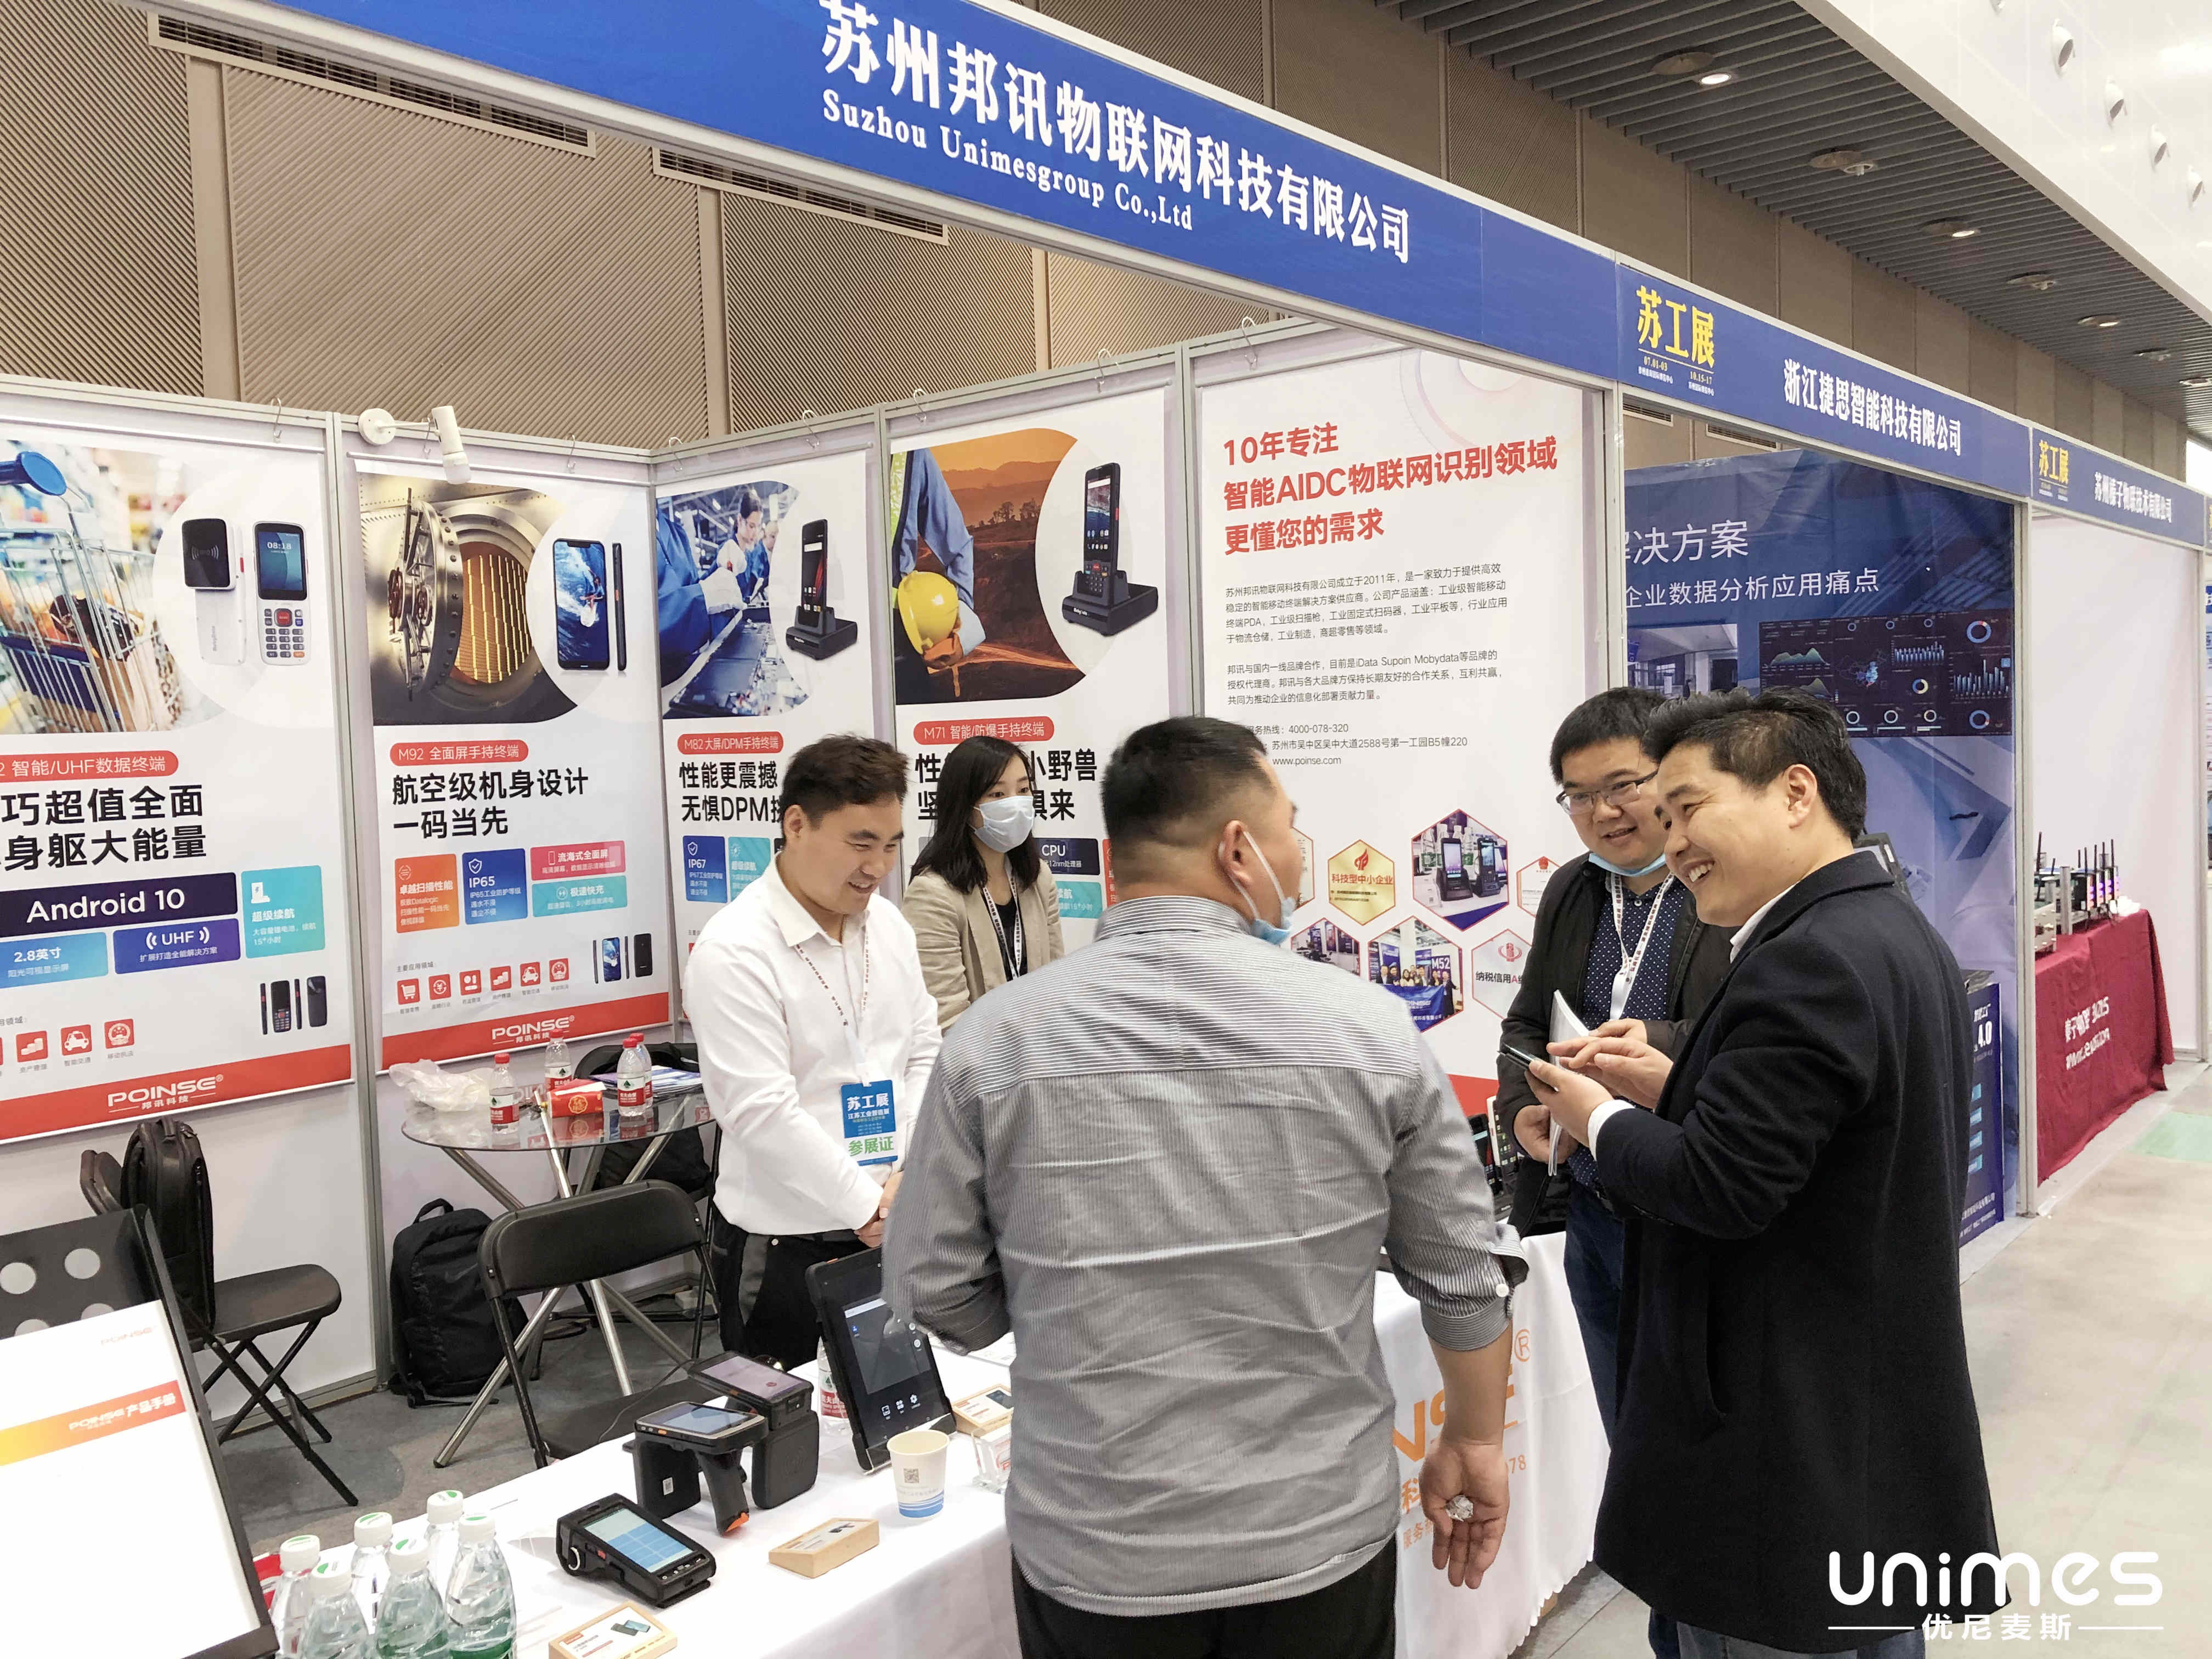 Unimes was invited to exhibit as premium supplier in IIE 2021